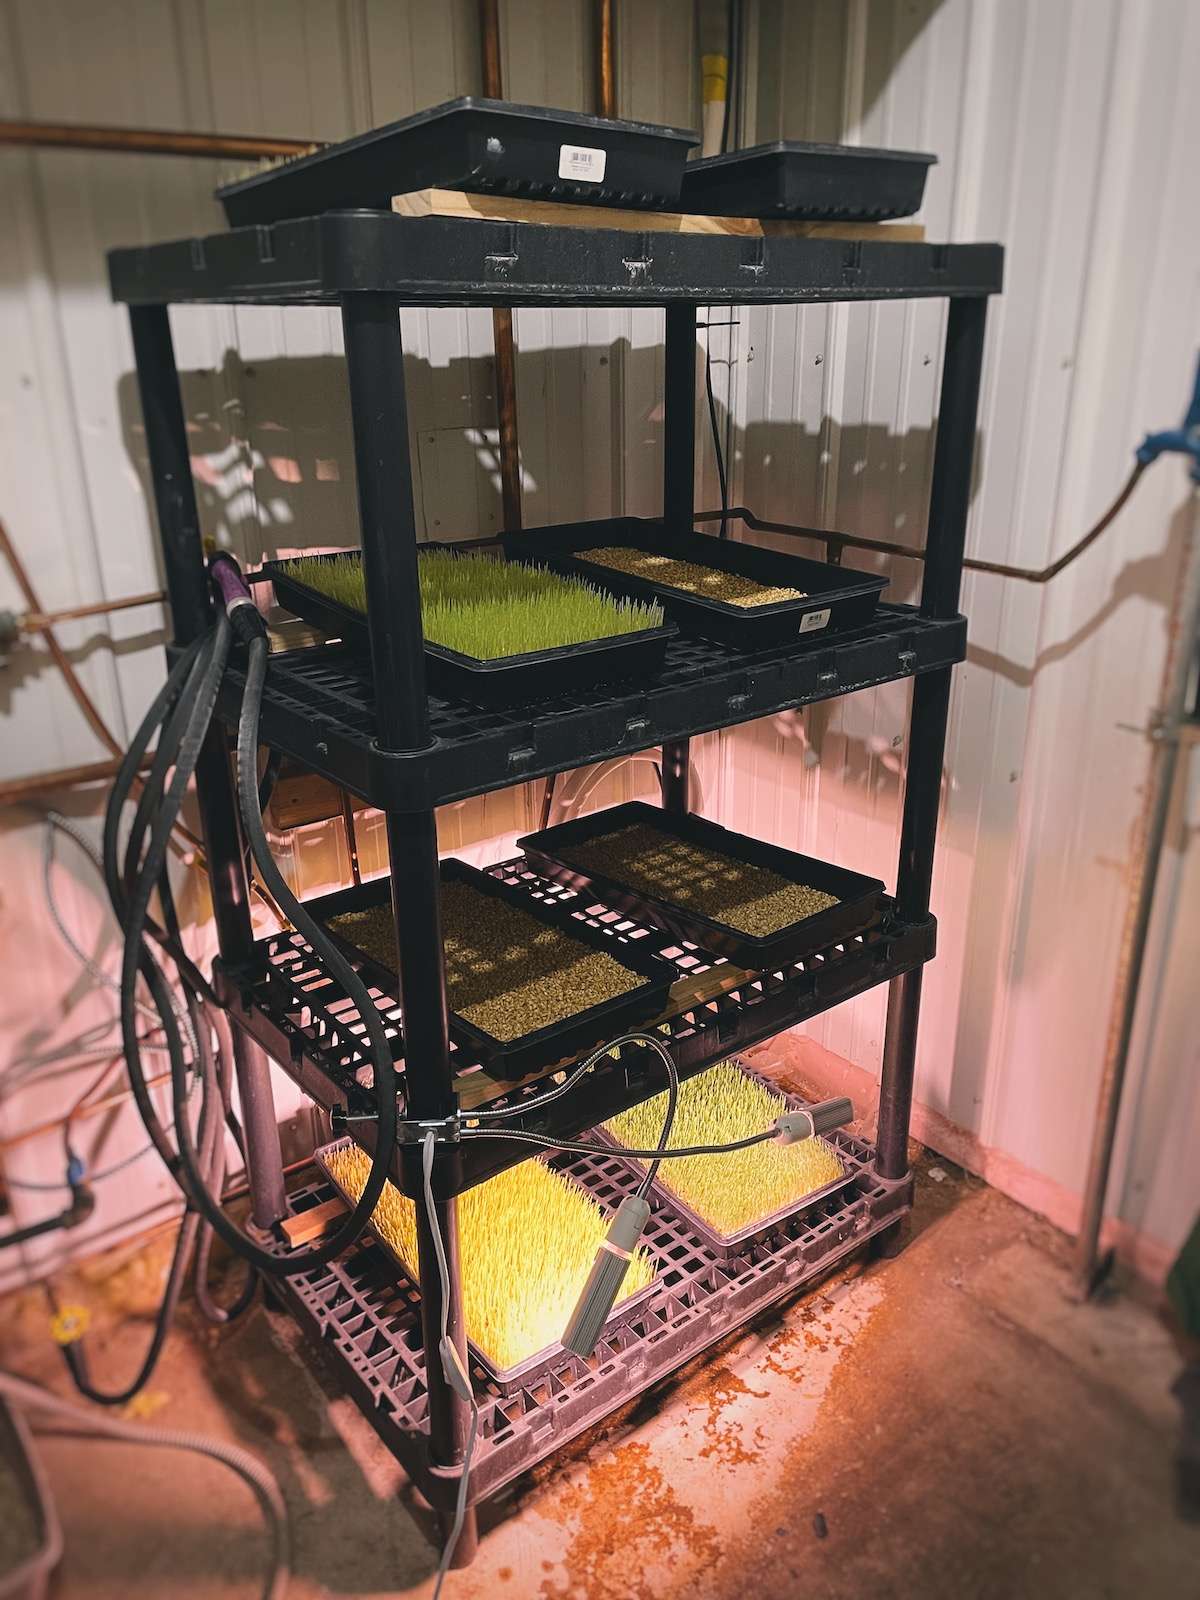 Photo of my entire chicken fodder station with grow lights